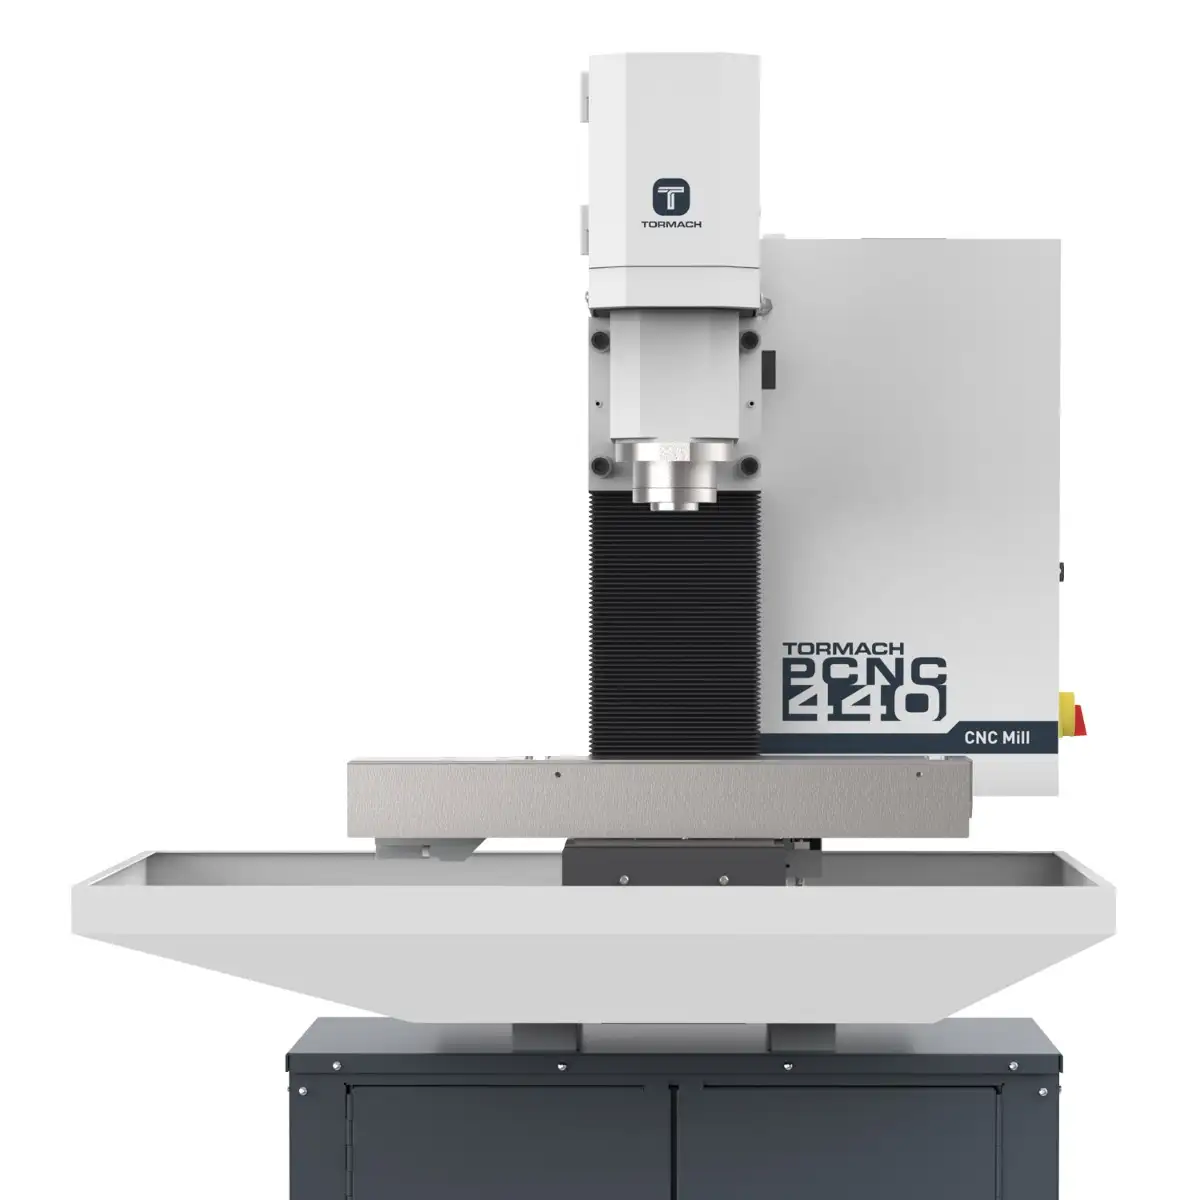 PCNC 440 Starter Package